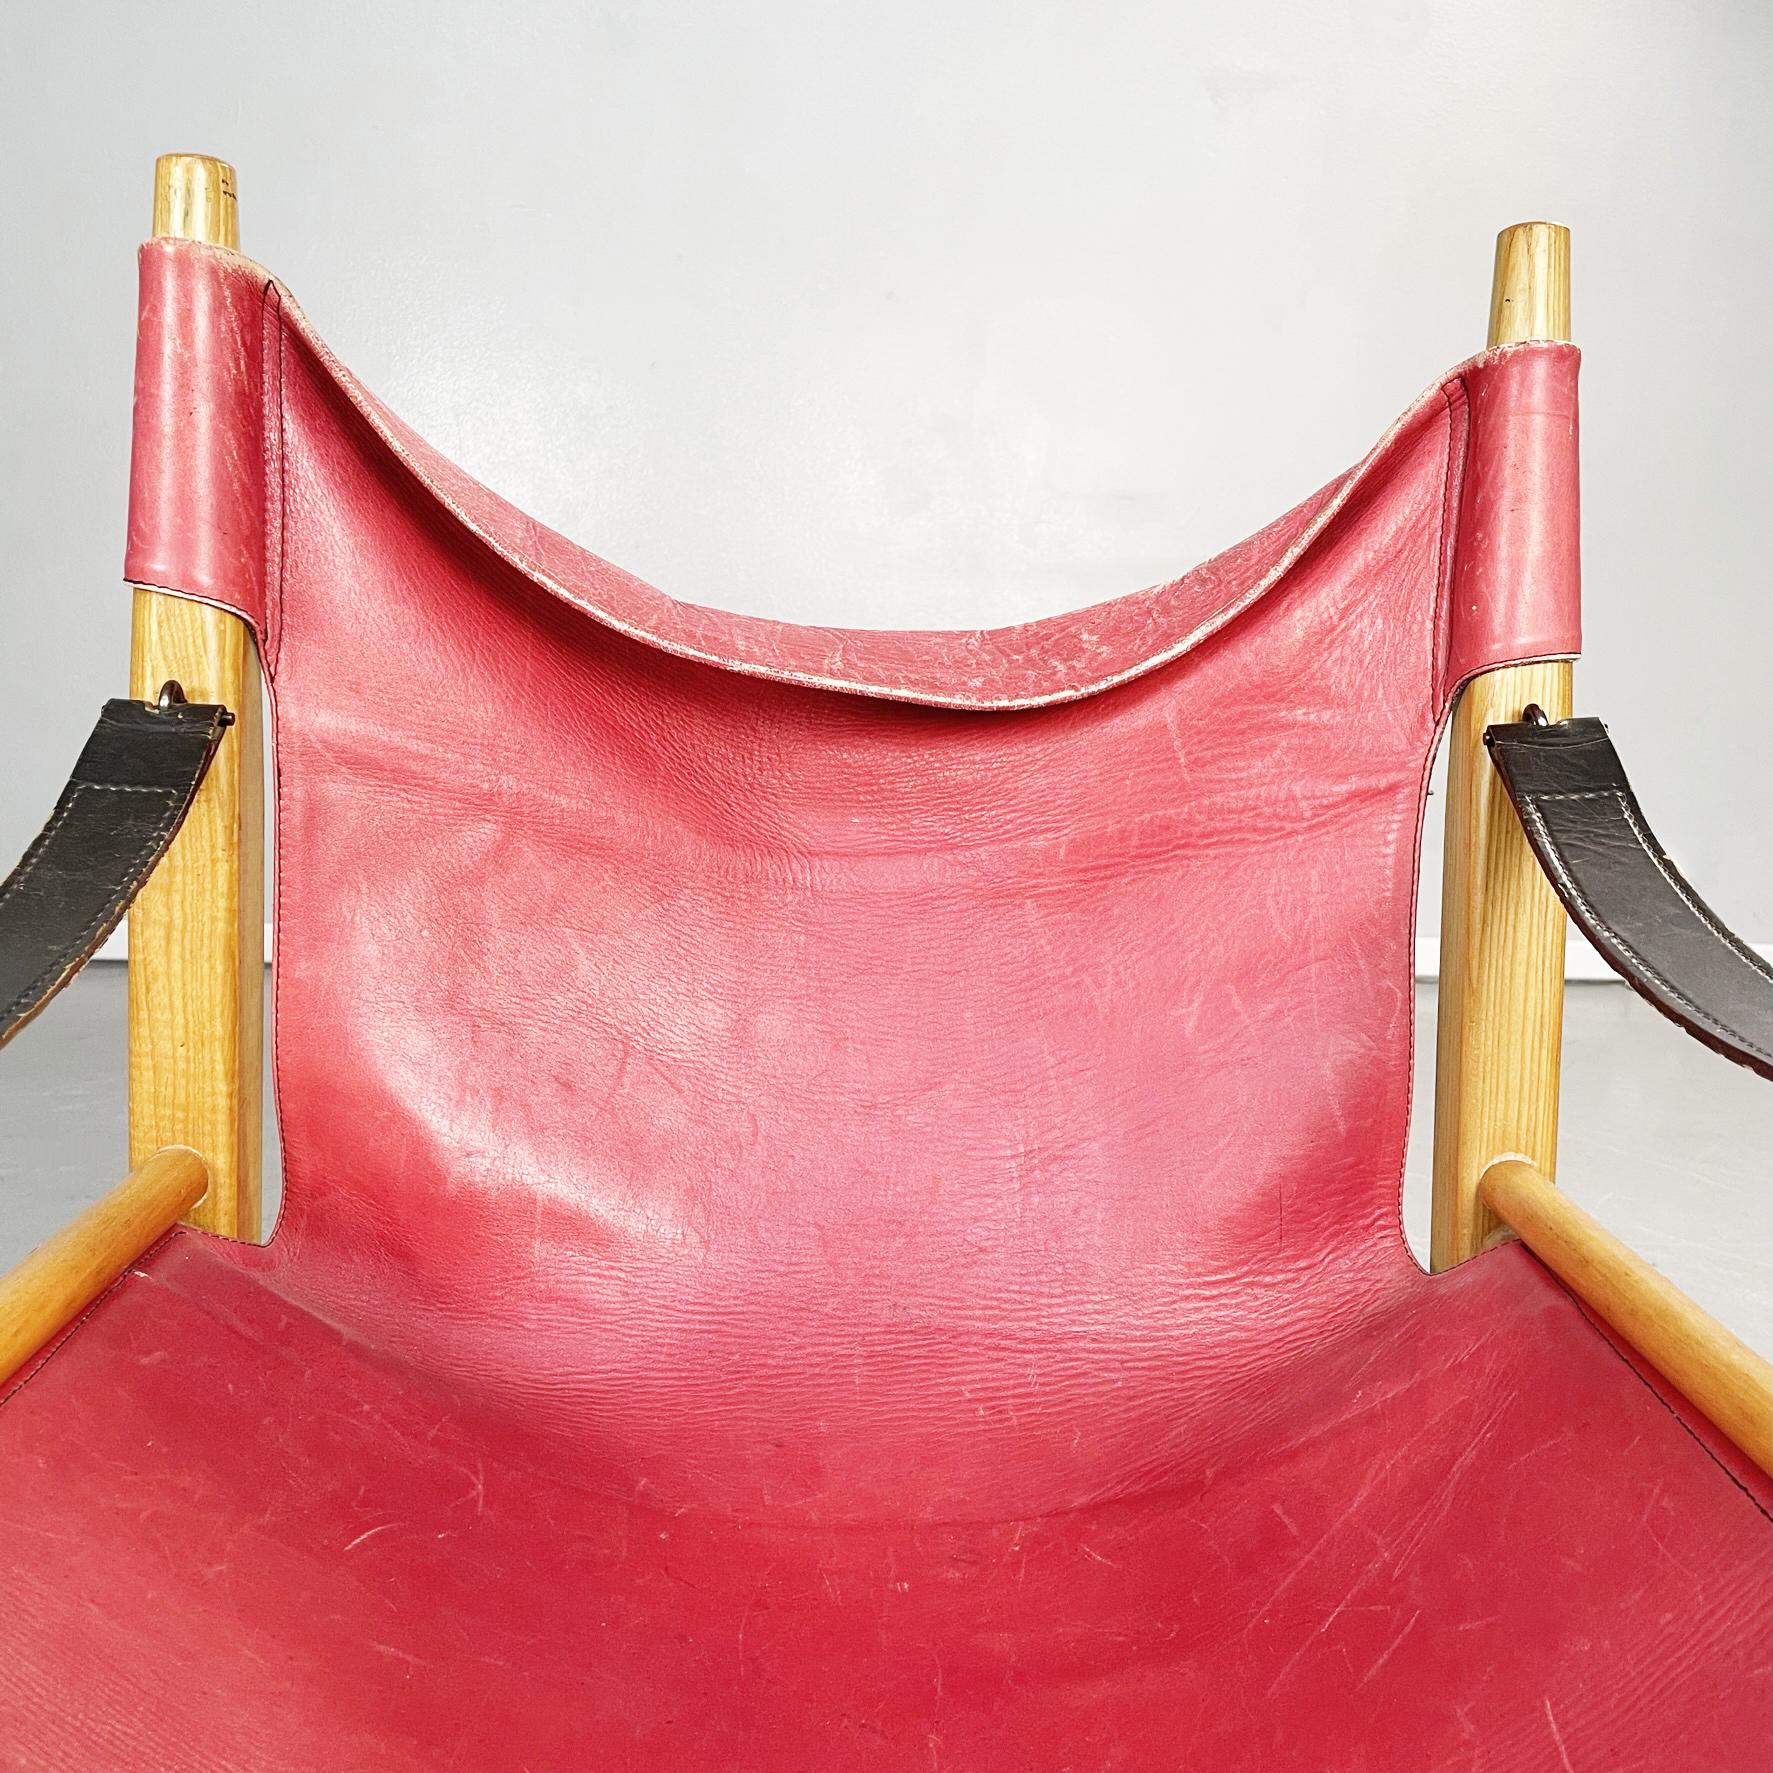 Metal Italian Mid-Century Leather N Wood Armchair Oasi 85 by Legler for Zanotta, 1960s For Sale